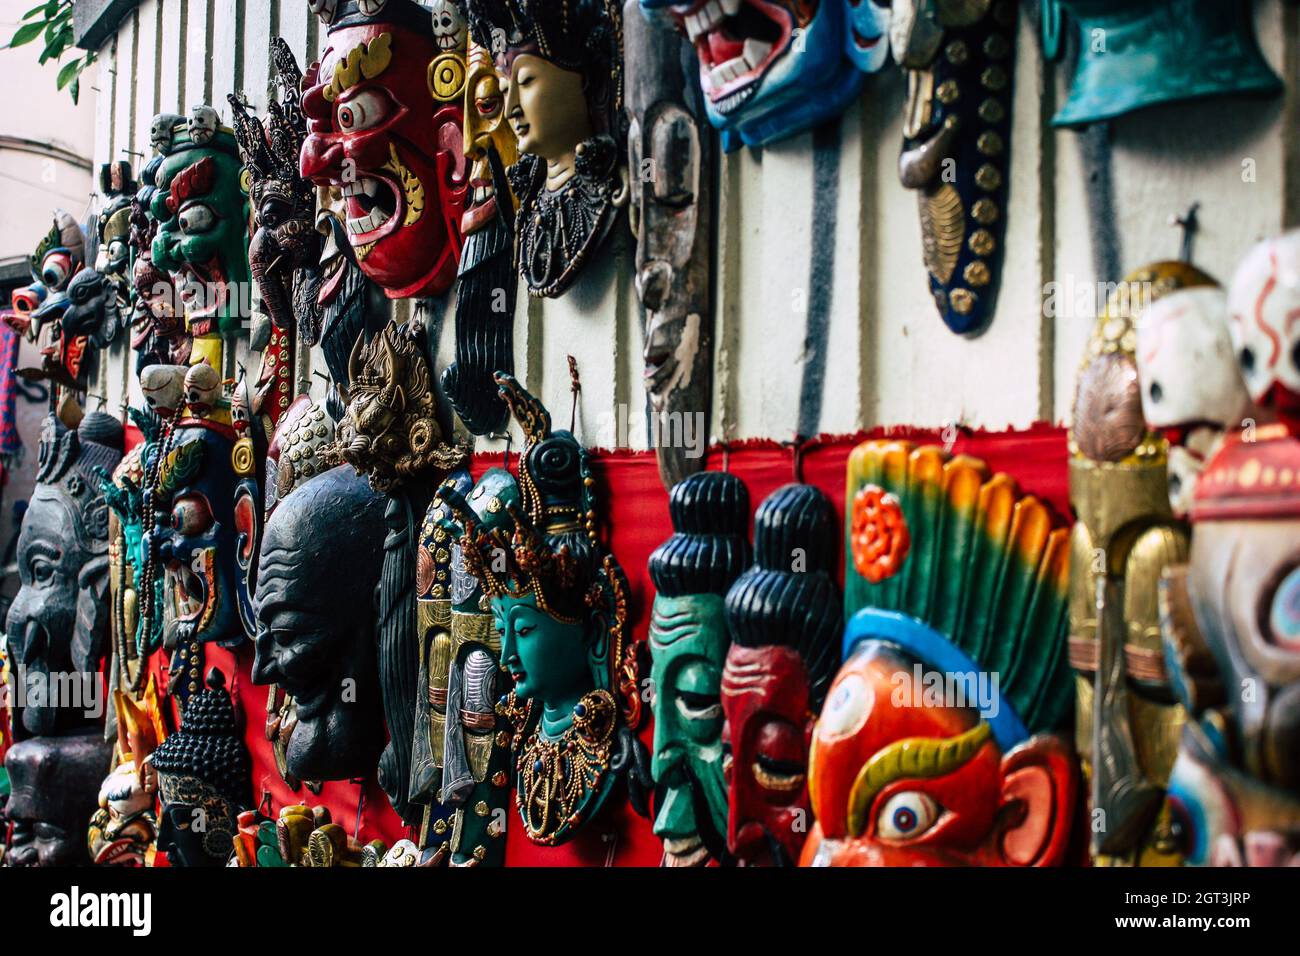 Masks For Sale At Market Stock Photo